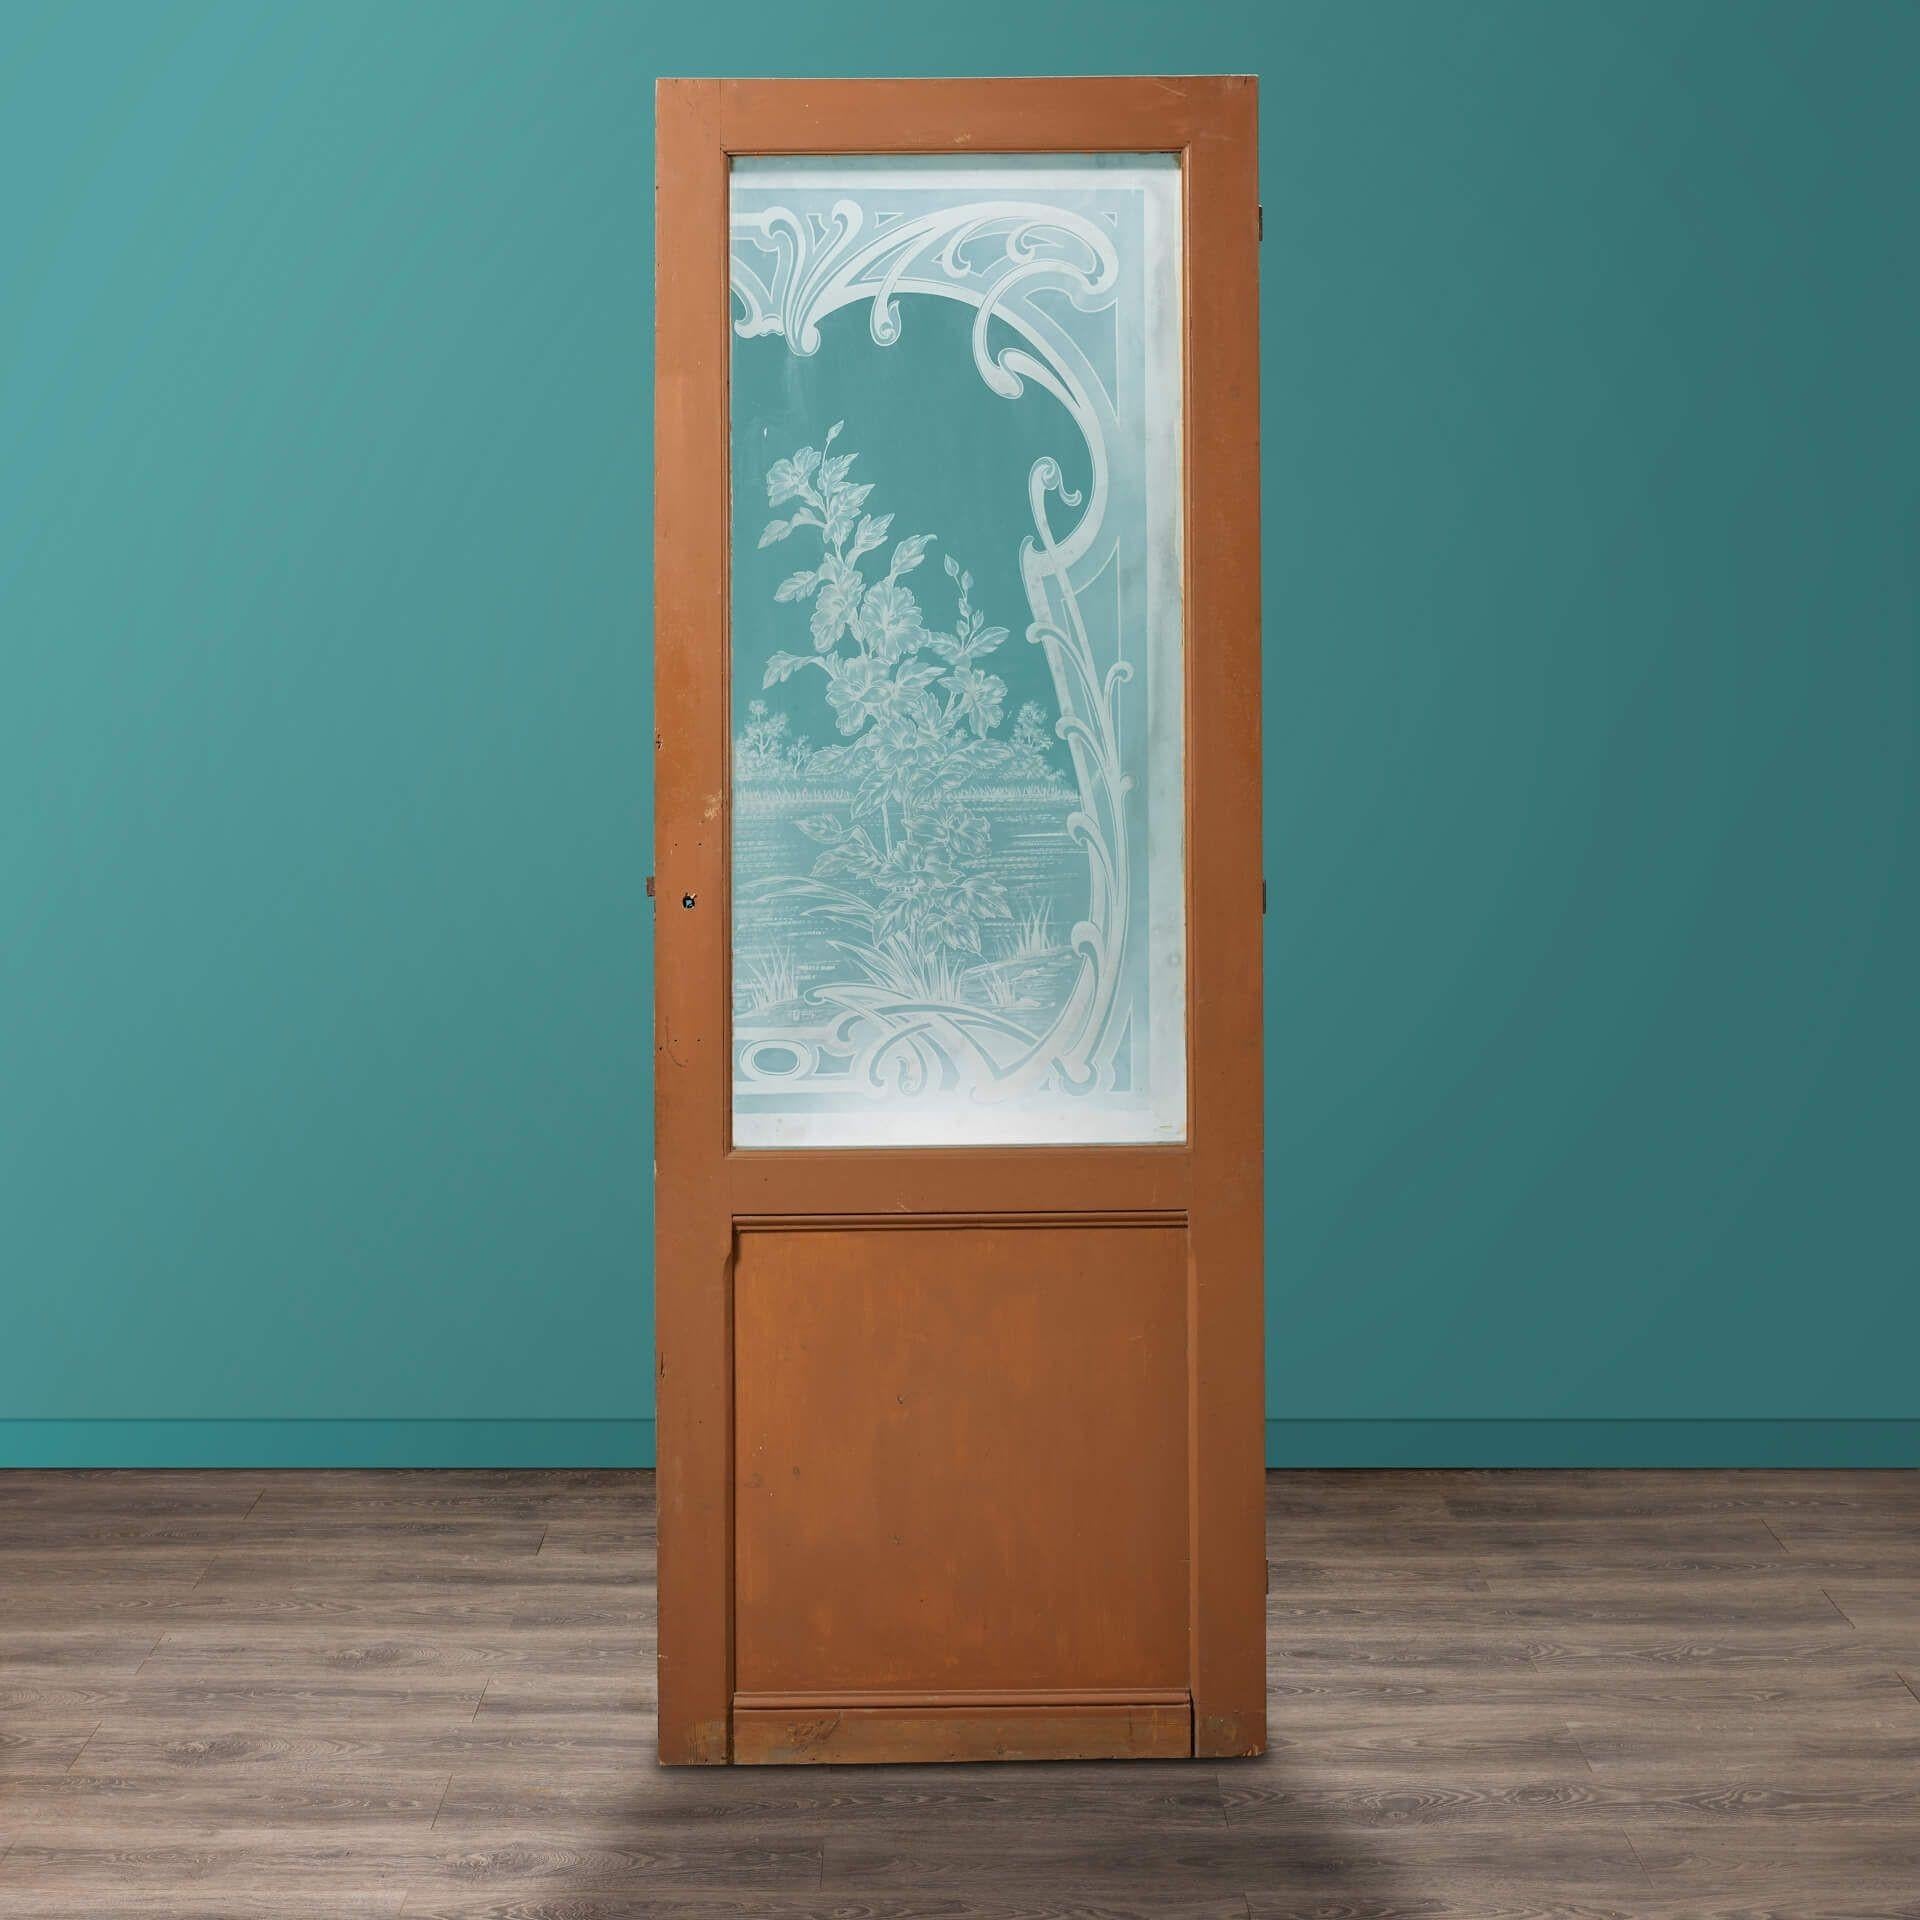 A tall antique pitch pine acid etched glazed door. The main panel is artistically glazed with an acid etched riverbank scene depicting flowers, shrubbery, and surrounding scrolls.

In Louis style with a painted pine finish, this exquisite door is a